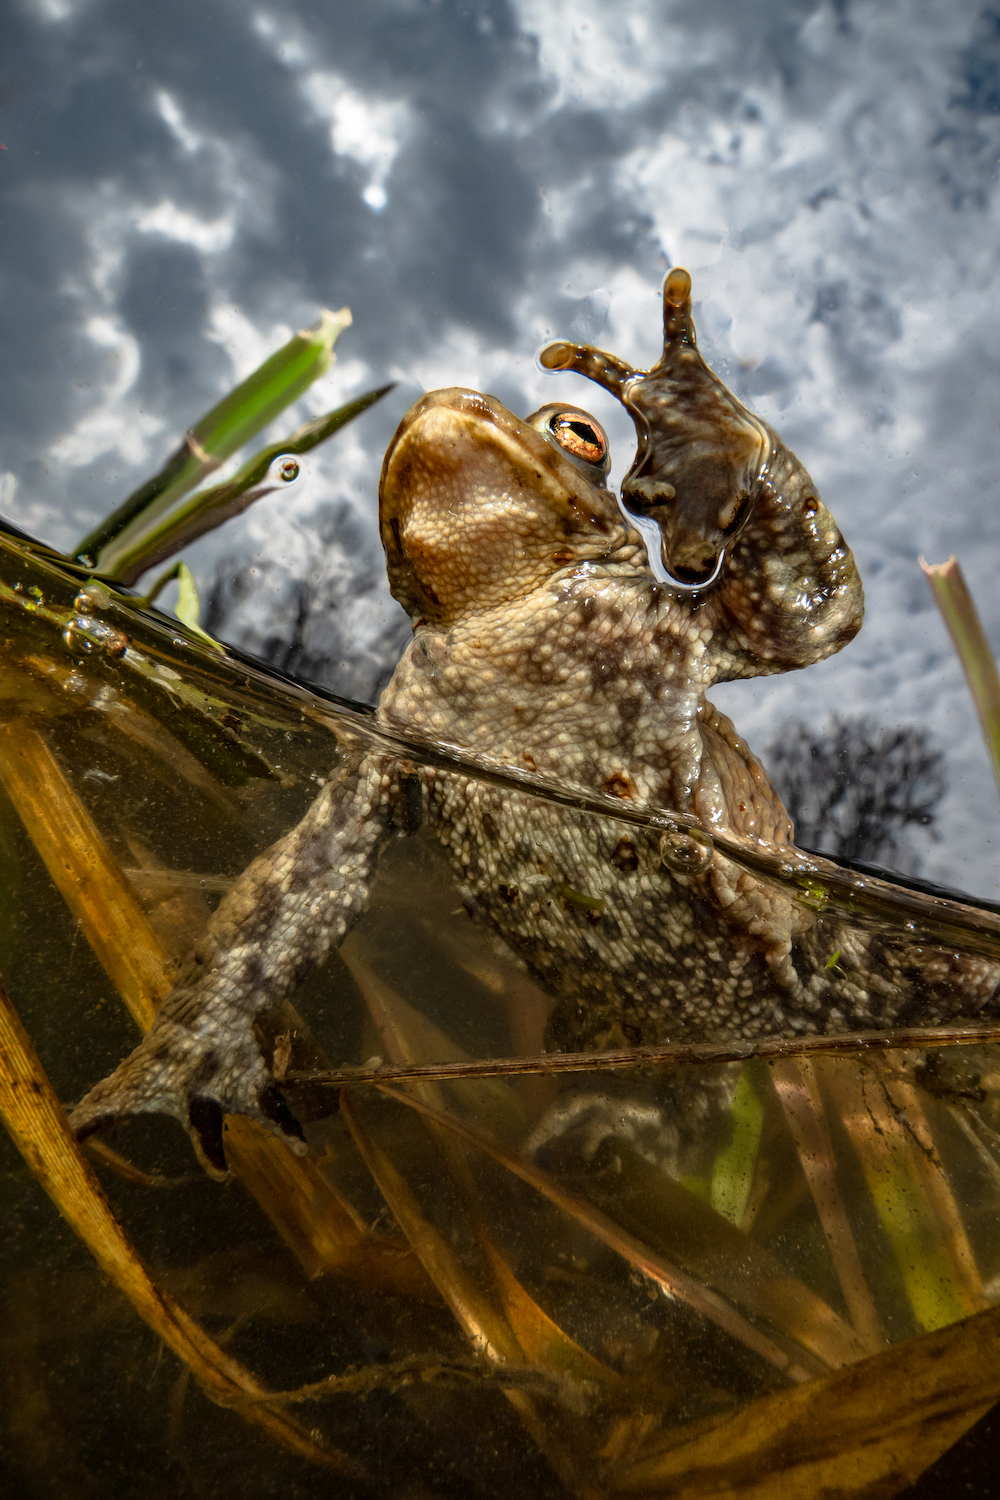 This image of a toad, titled 'Peace', won the Compact category of the Underwater Photographer of the Year 2022 competition. Image: © Enrico Somogyi/UPY2022